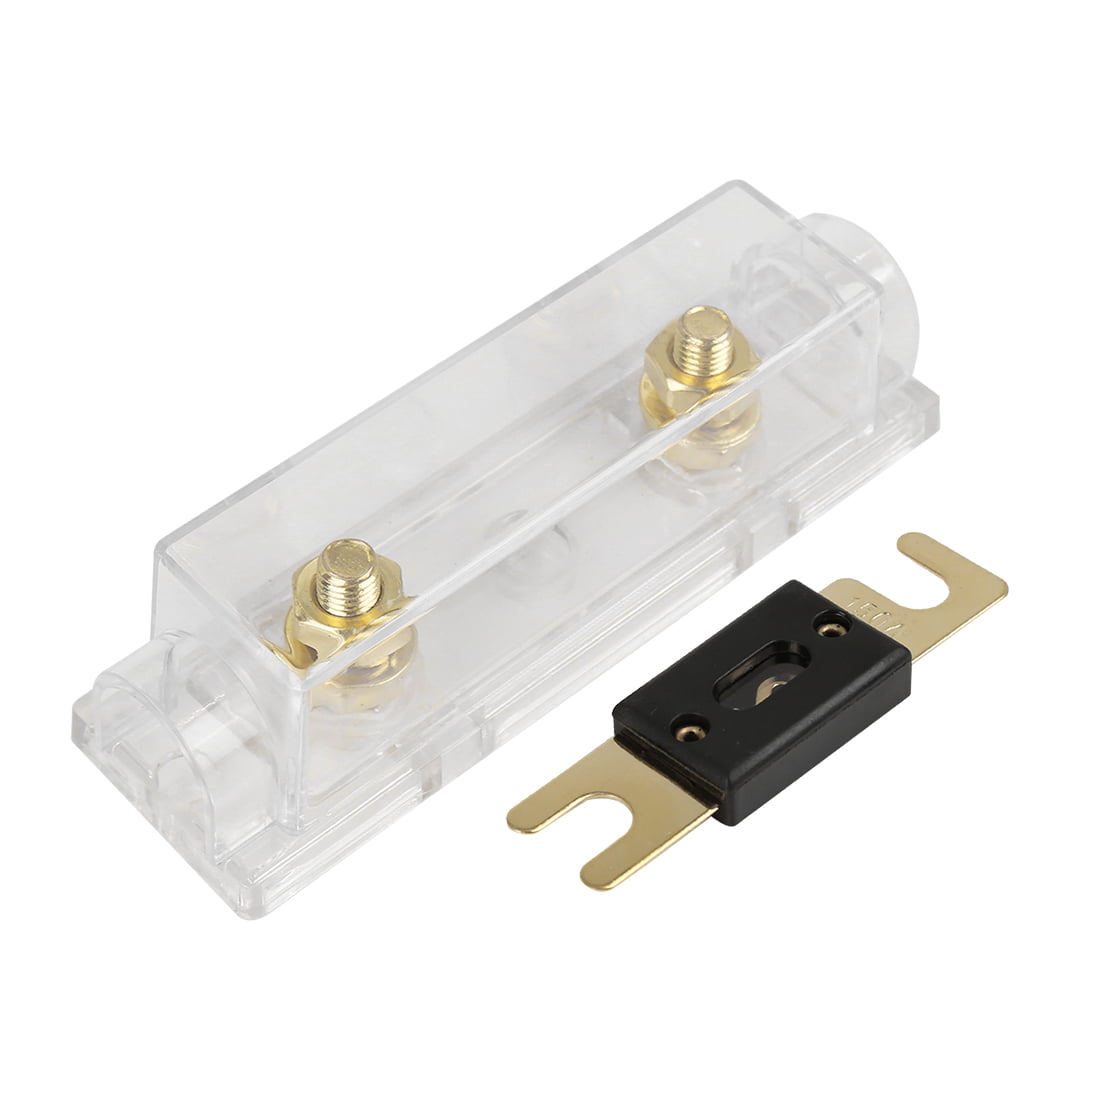 GOLD 150A 150 AMP HIGH TEMPERATURE ANL FUSE with LED INDICATOR CAR AUDIO 